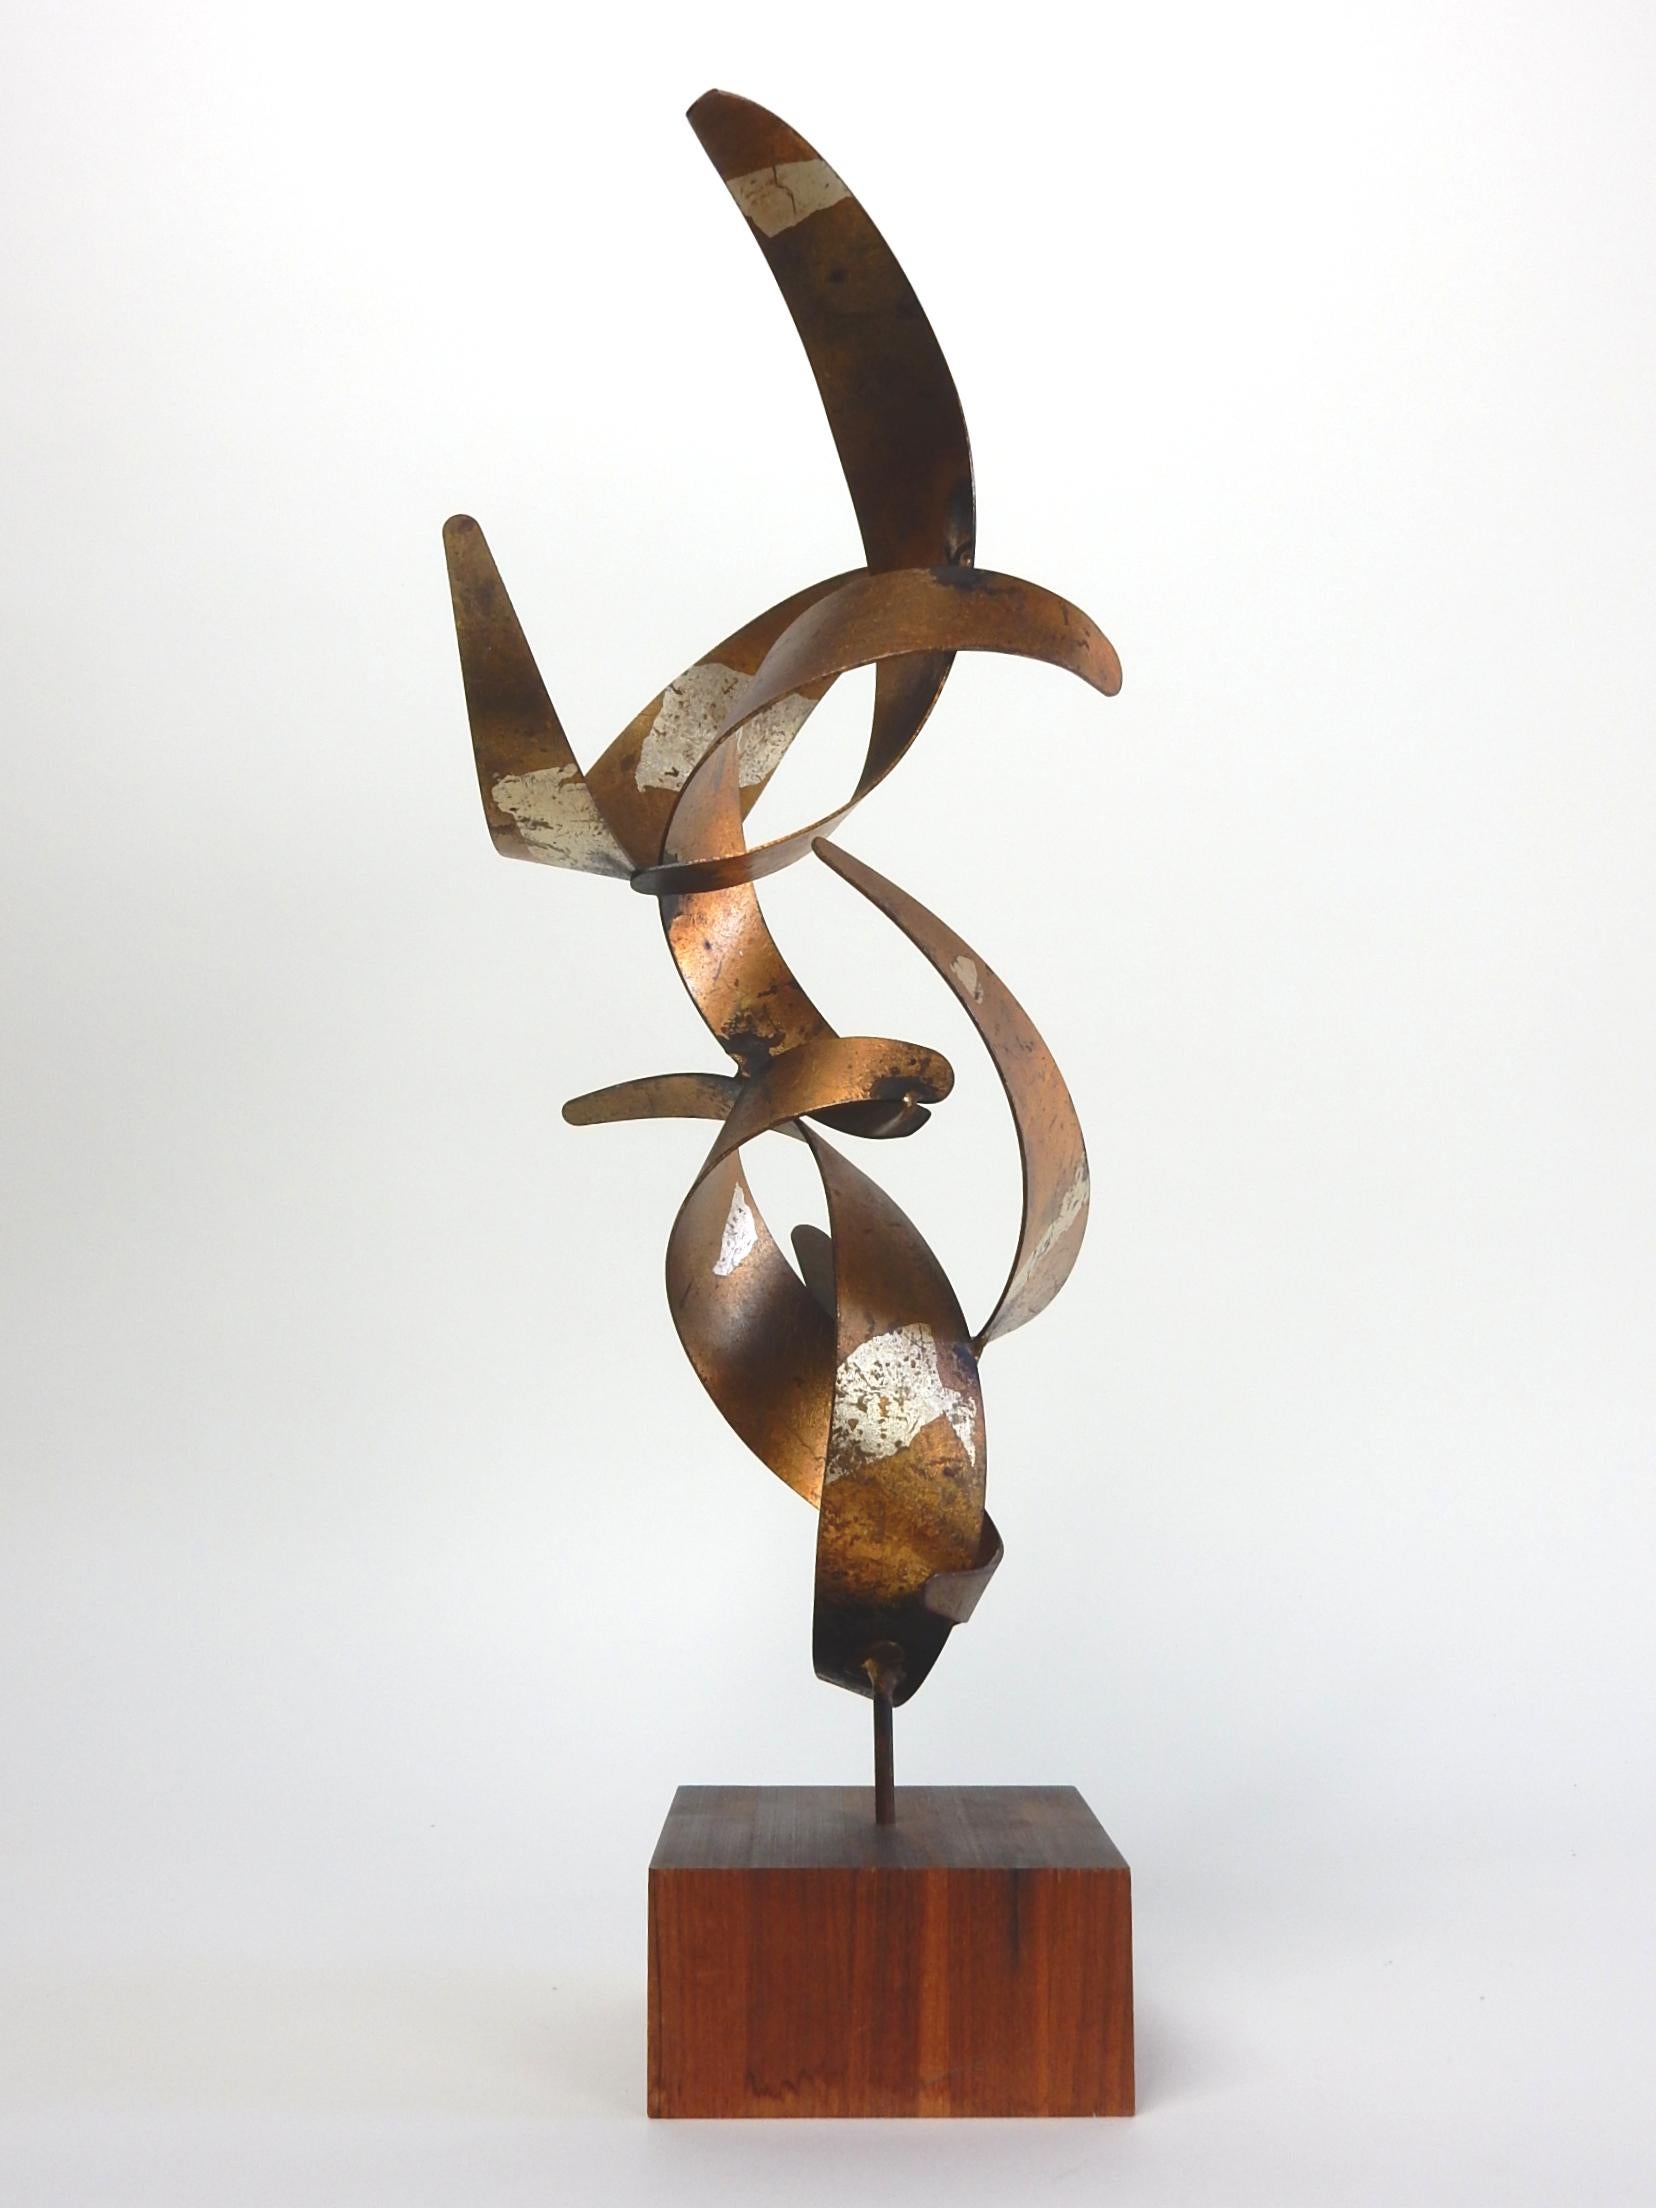 Rare early personal work of art by Bijan, (1936-2016).
Six perfectly contorted flame shapes welded together
and pierced into a teak block.
Signed on bottom edge (pictured).
Metal has a warm aged patina on top sides while
gold leaf with a splash